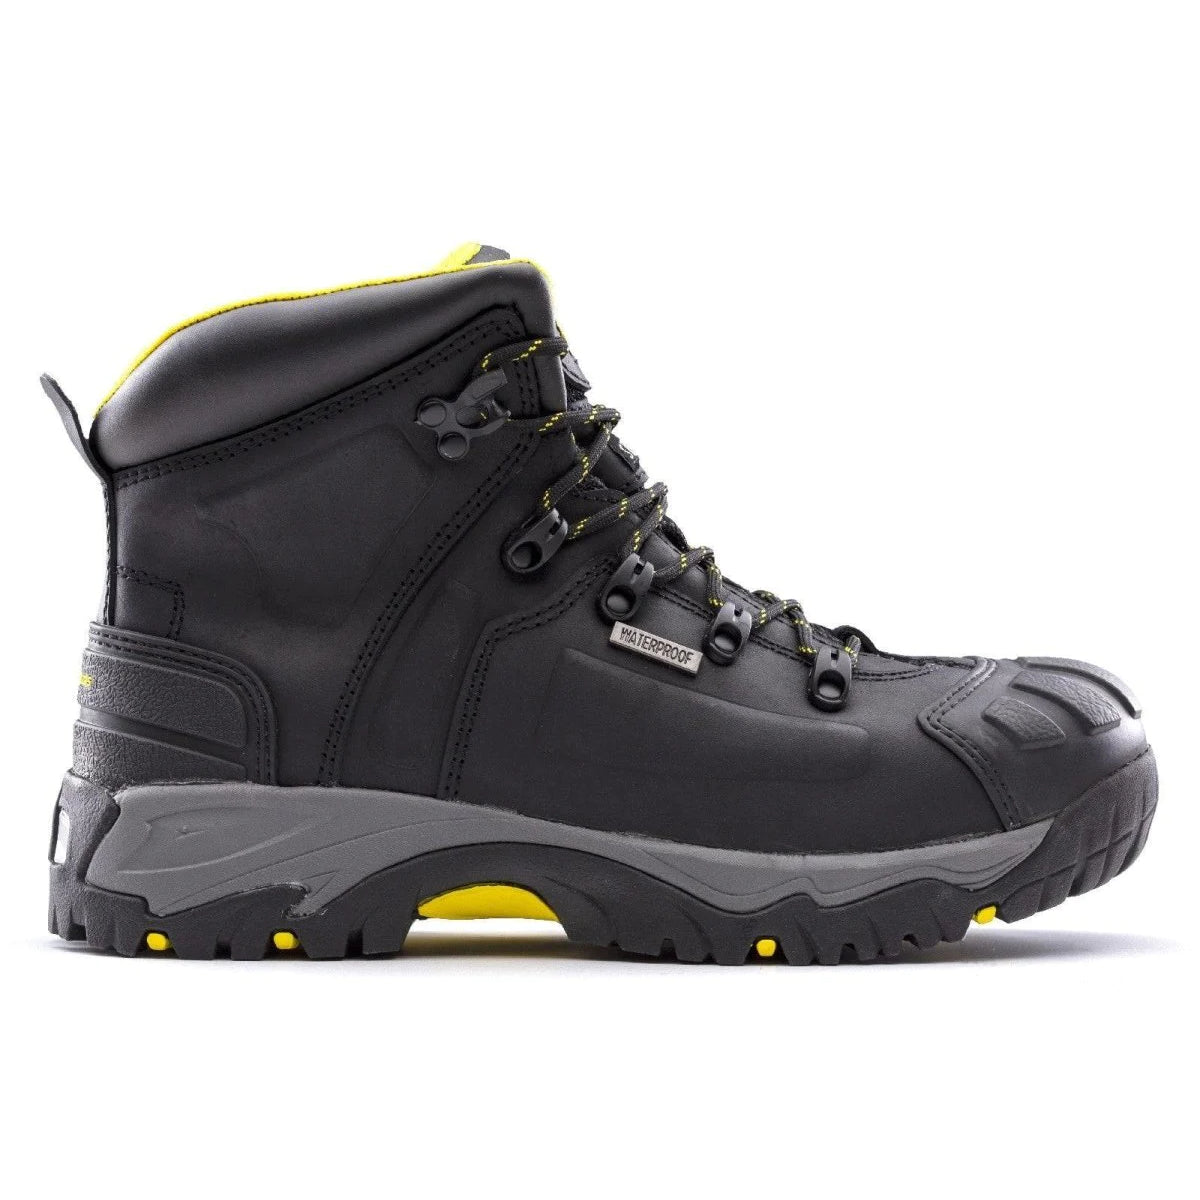 Amblers AS803 Waterproof Wide Fit Safety Boots - Shoe Store Direct